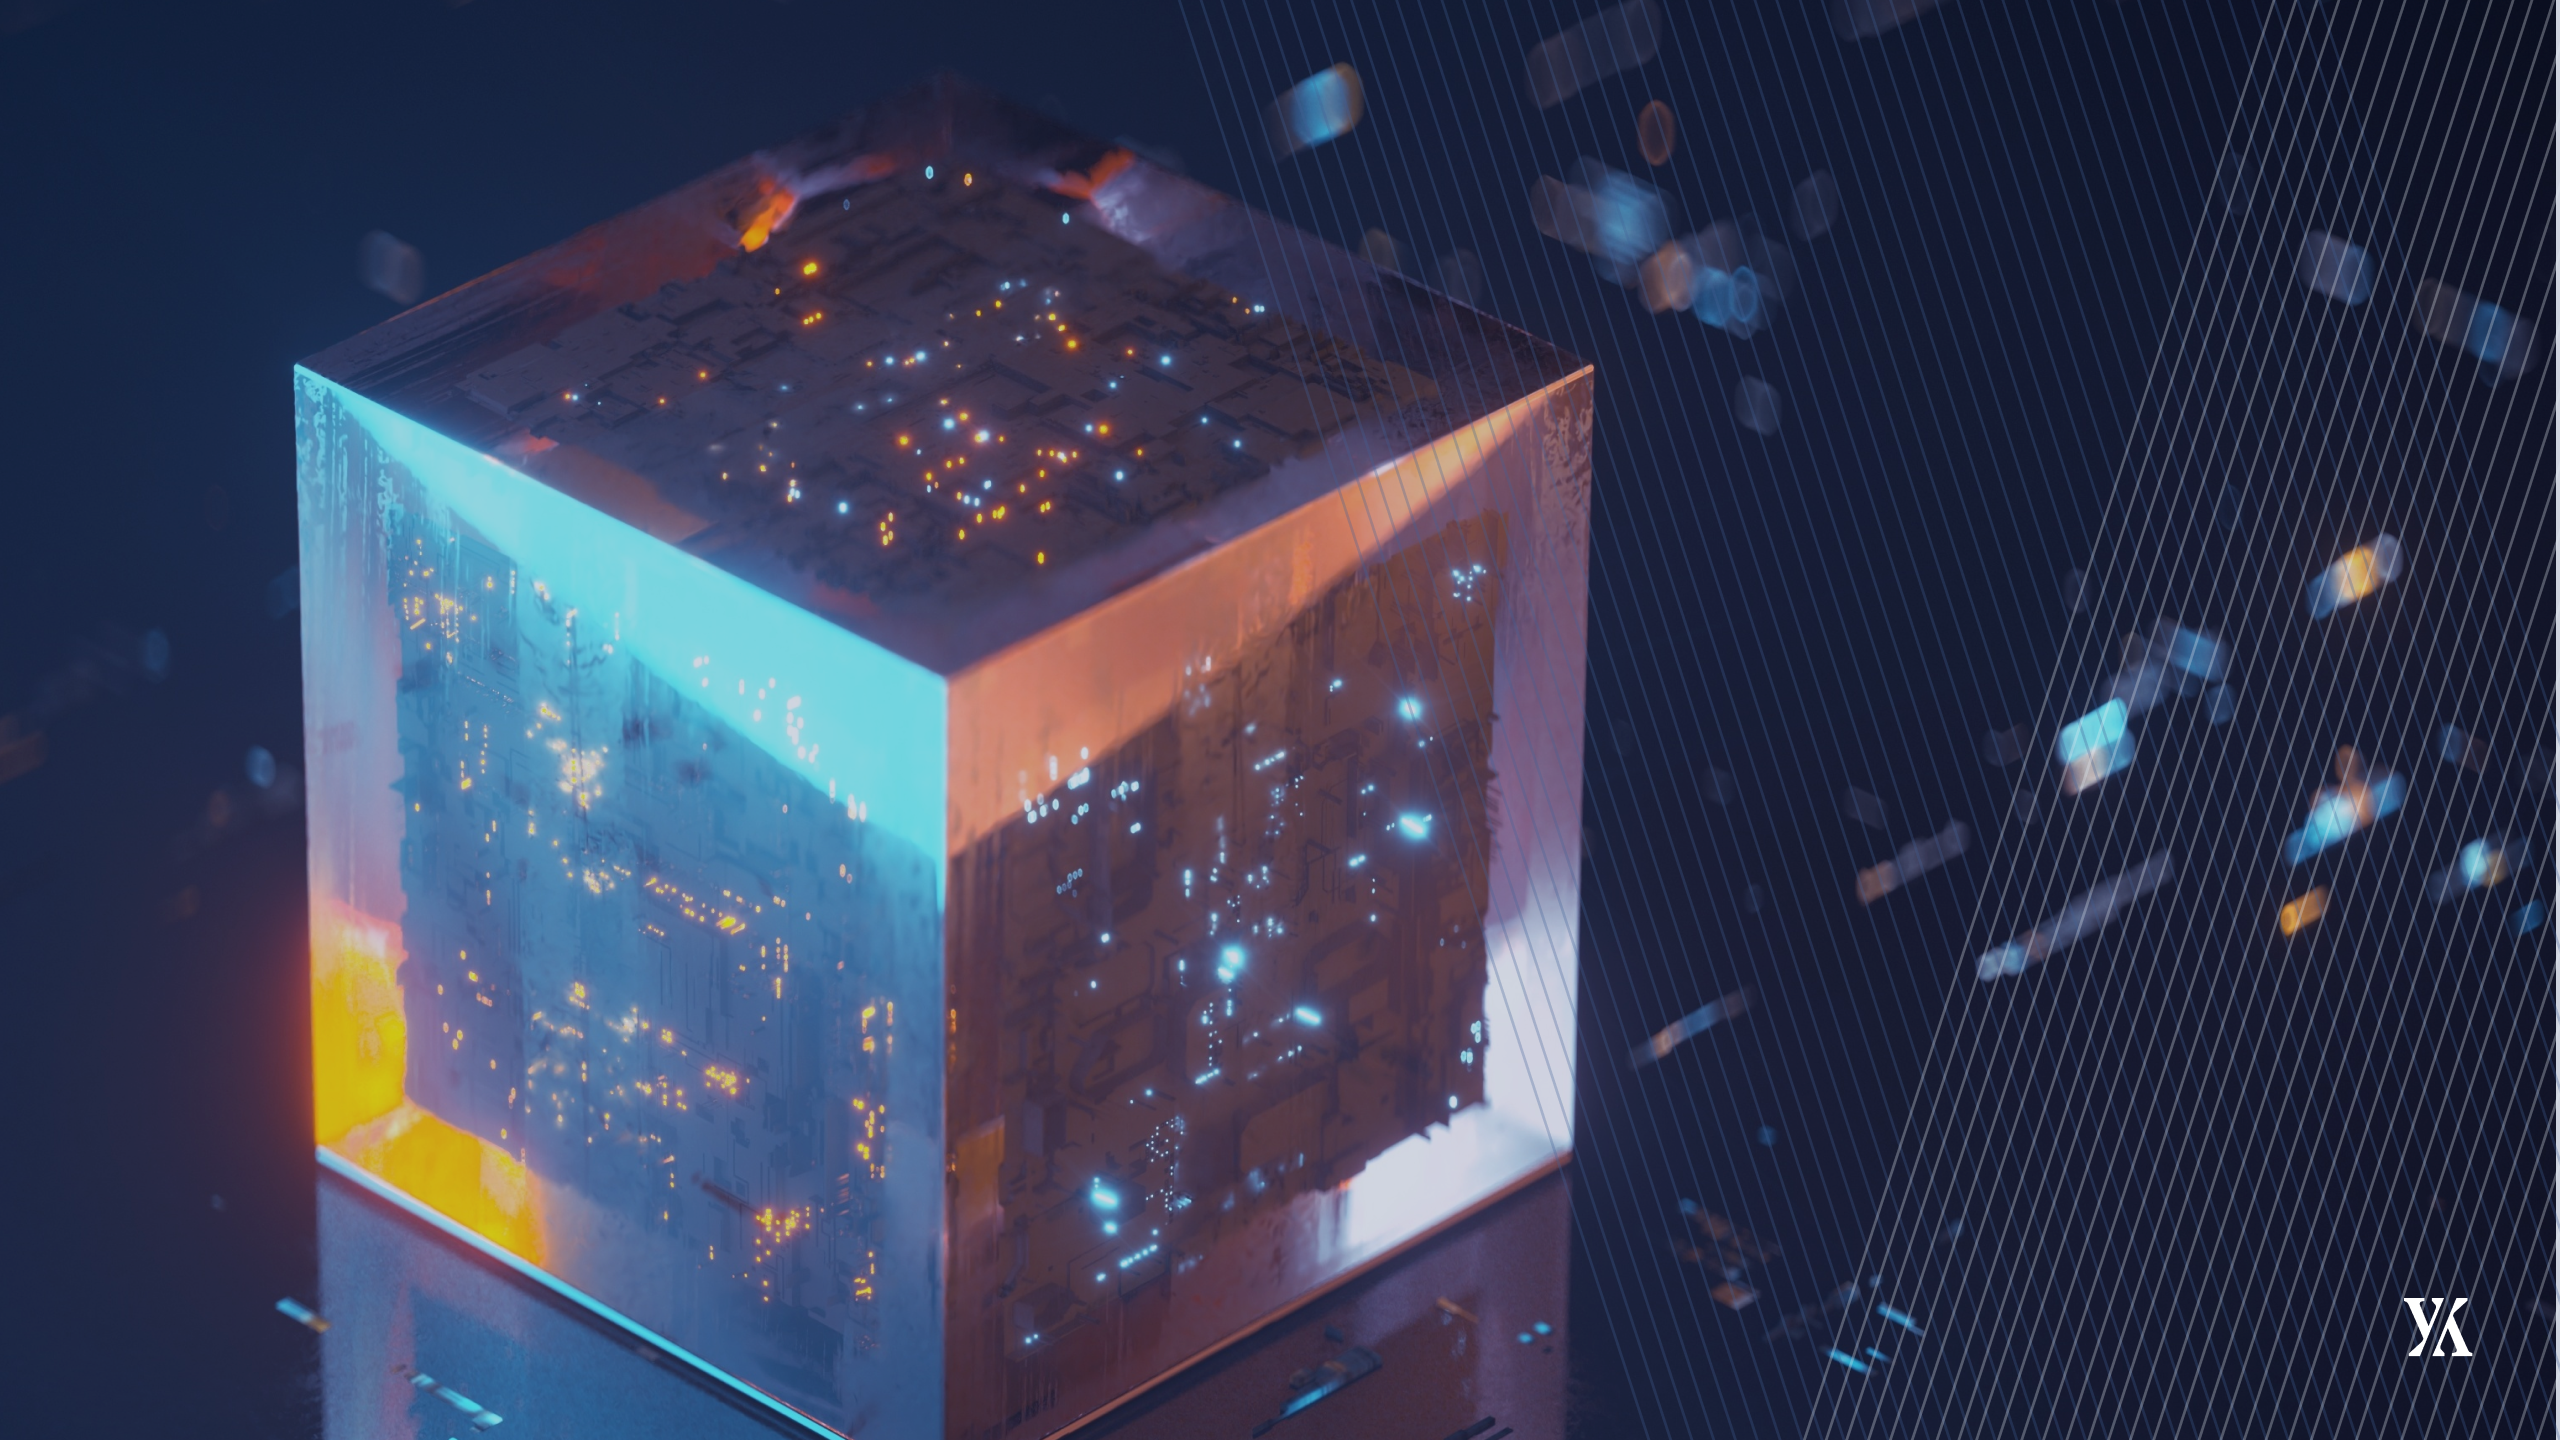 A futuristic looking cube is shown on the left